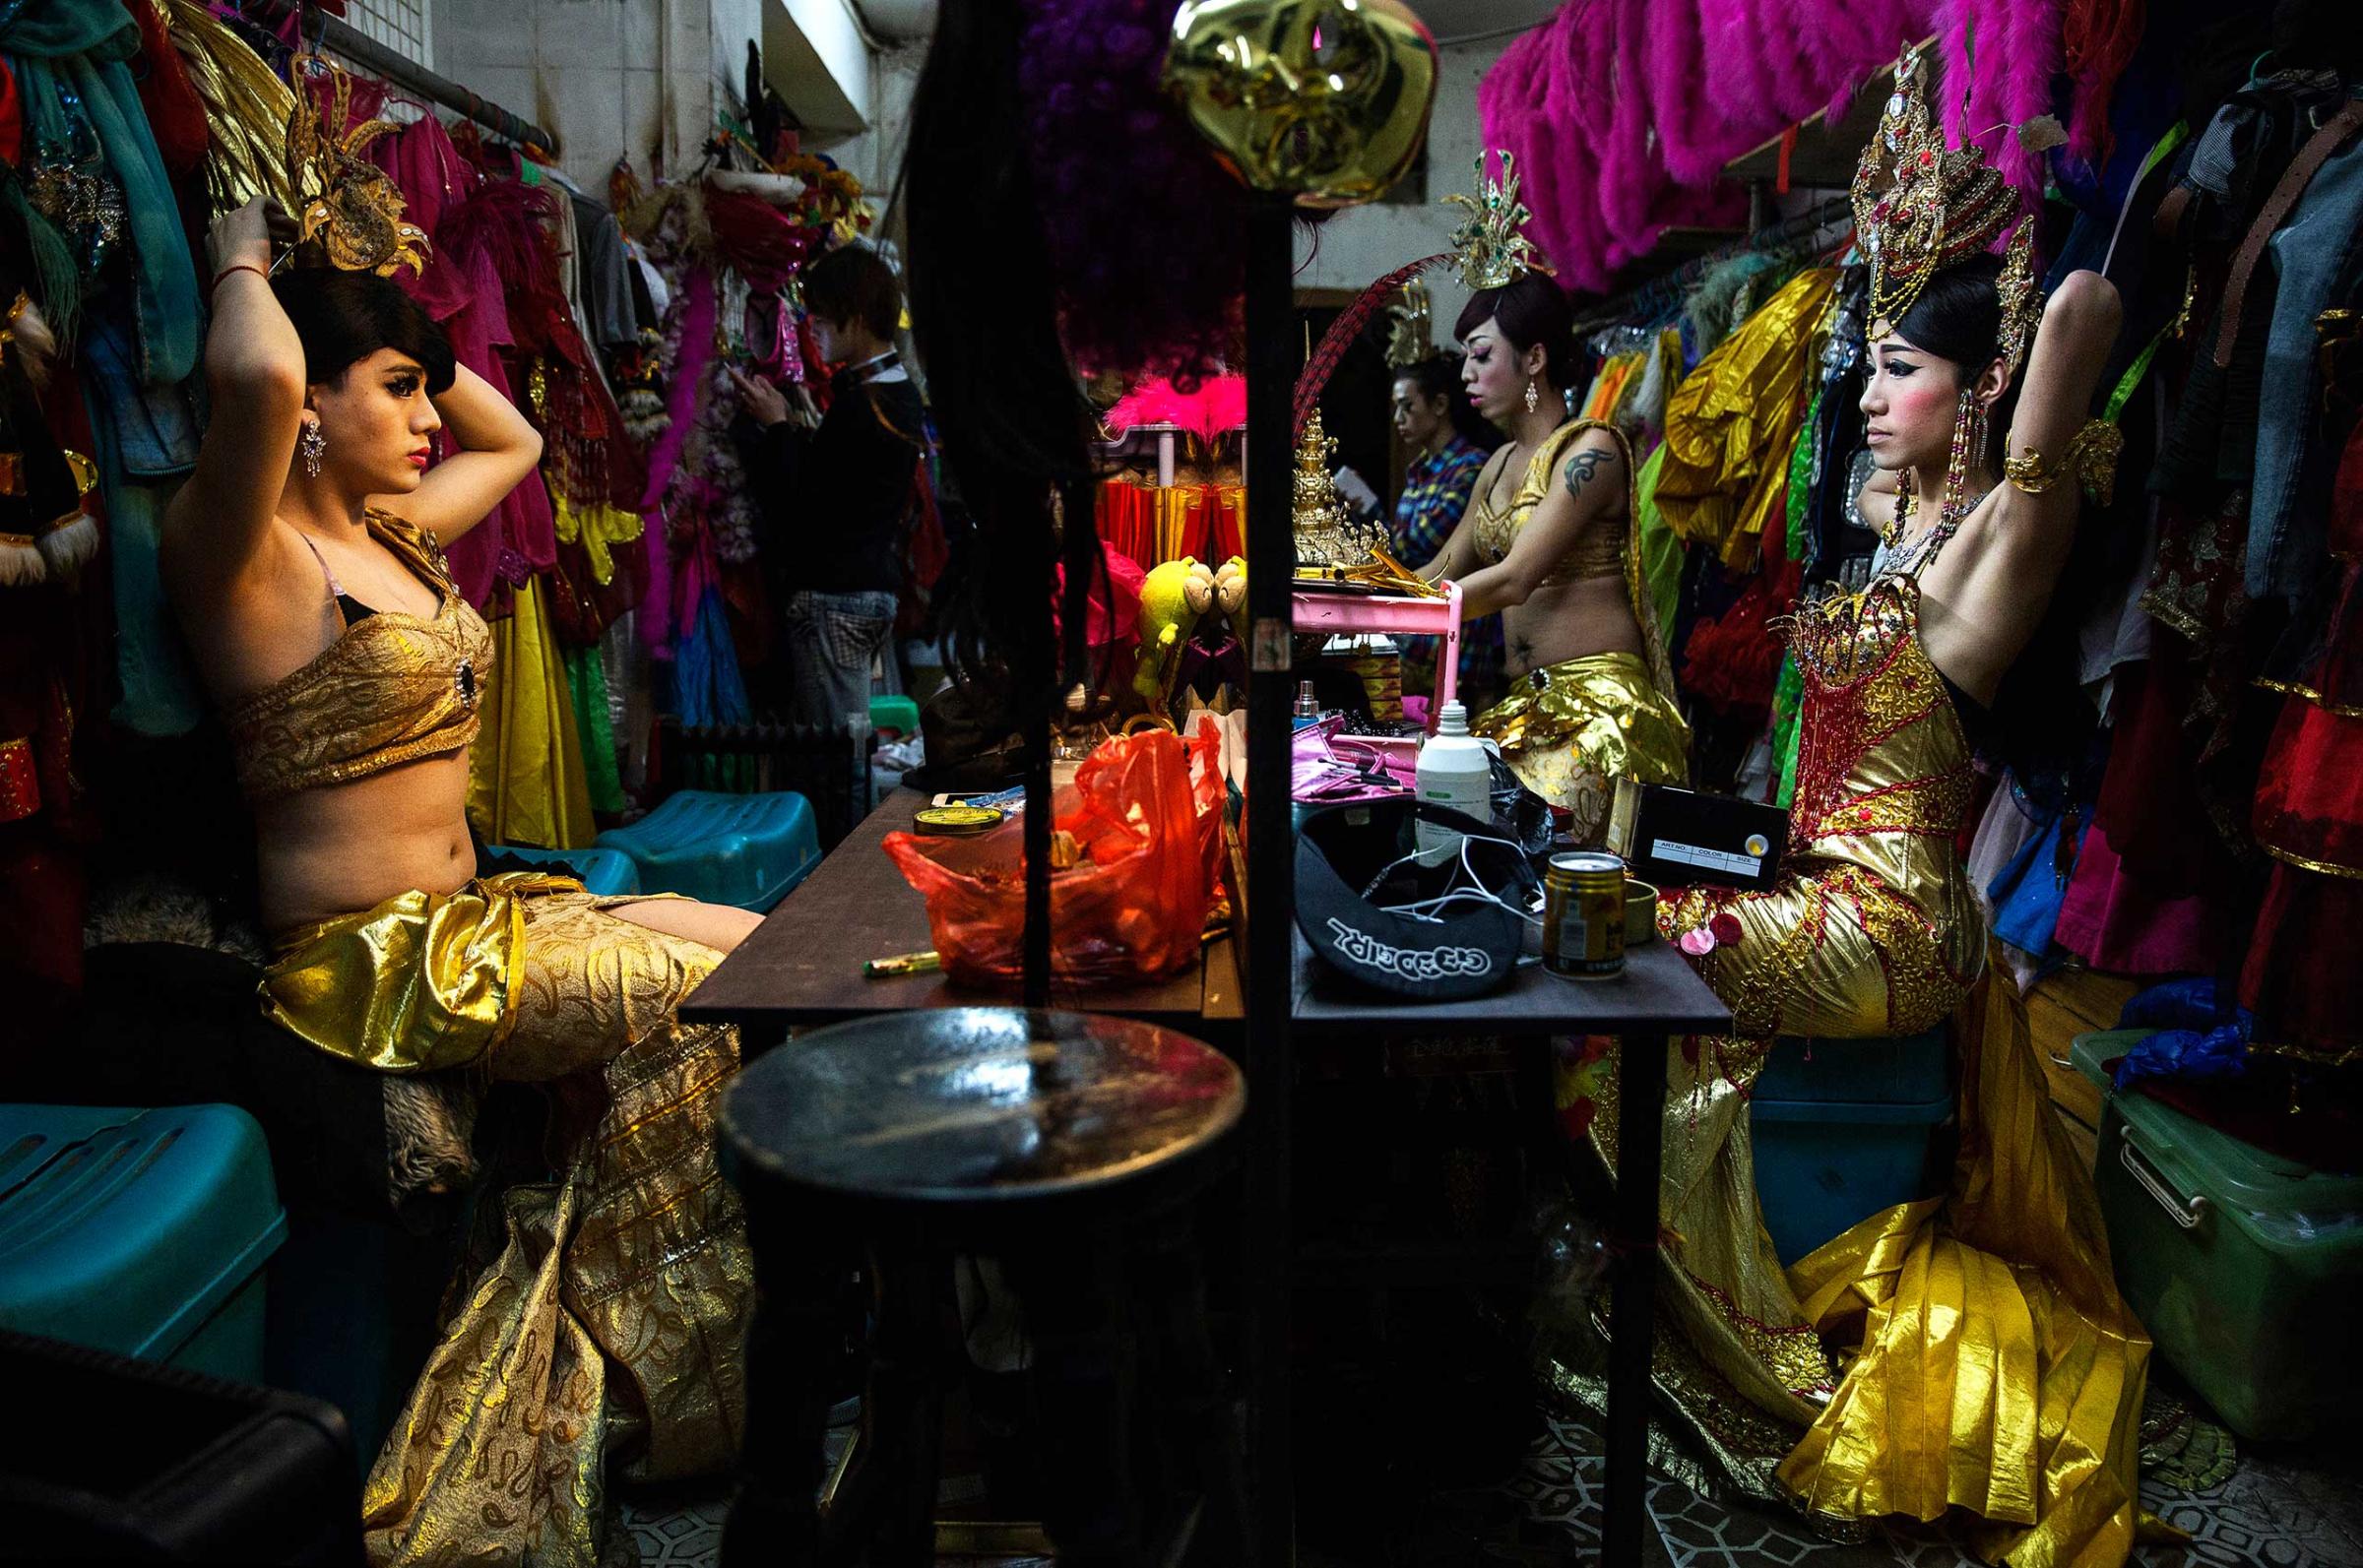 Chinese drag queens get ready backstage before performing at the Chunai 98 club in Nanning, Guangxi Province, southern China, on January 10, 2015.